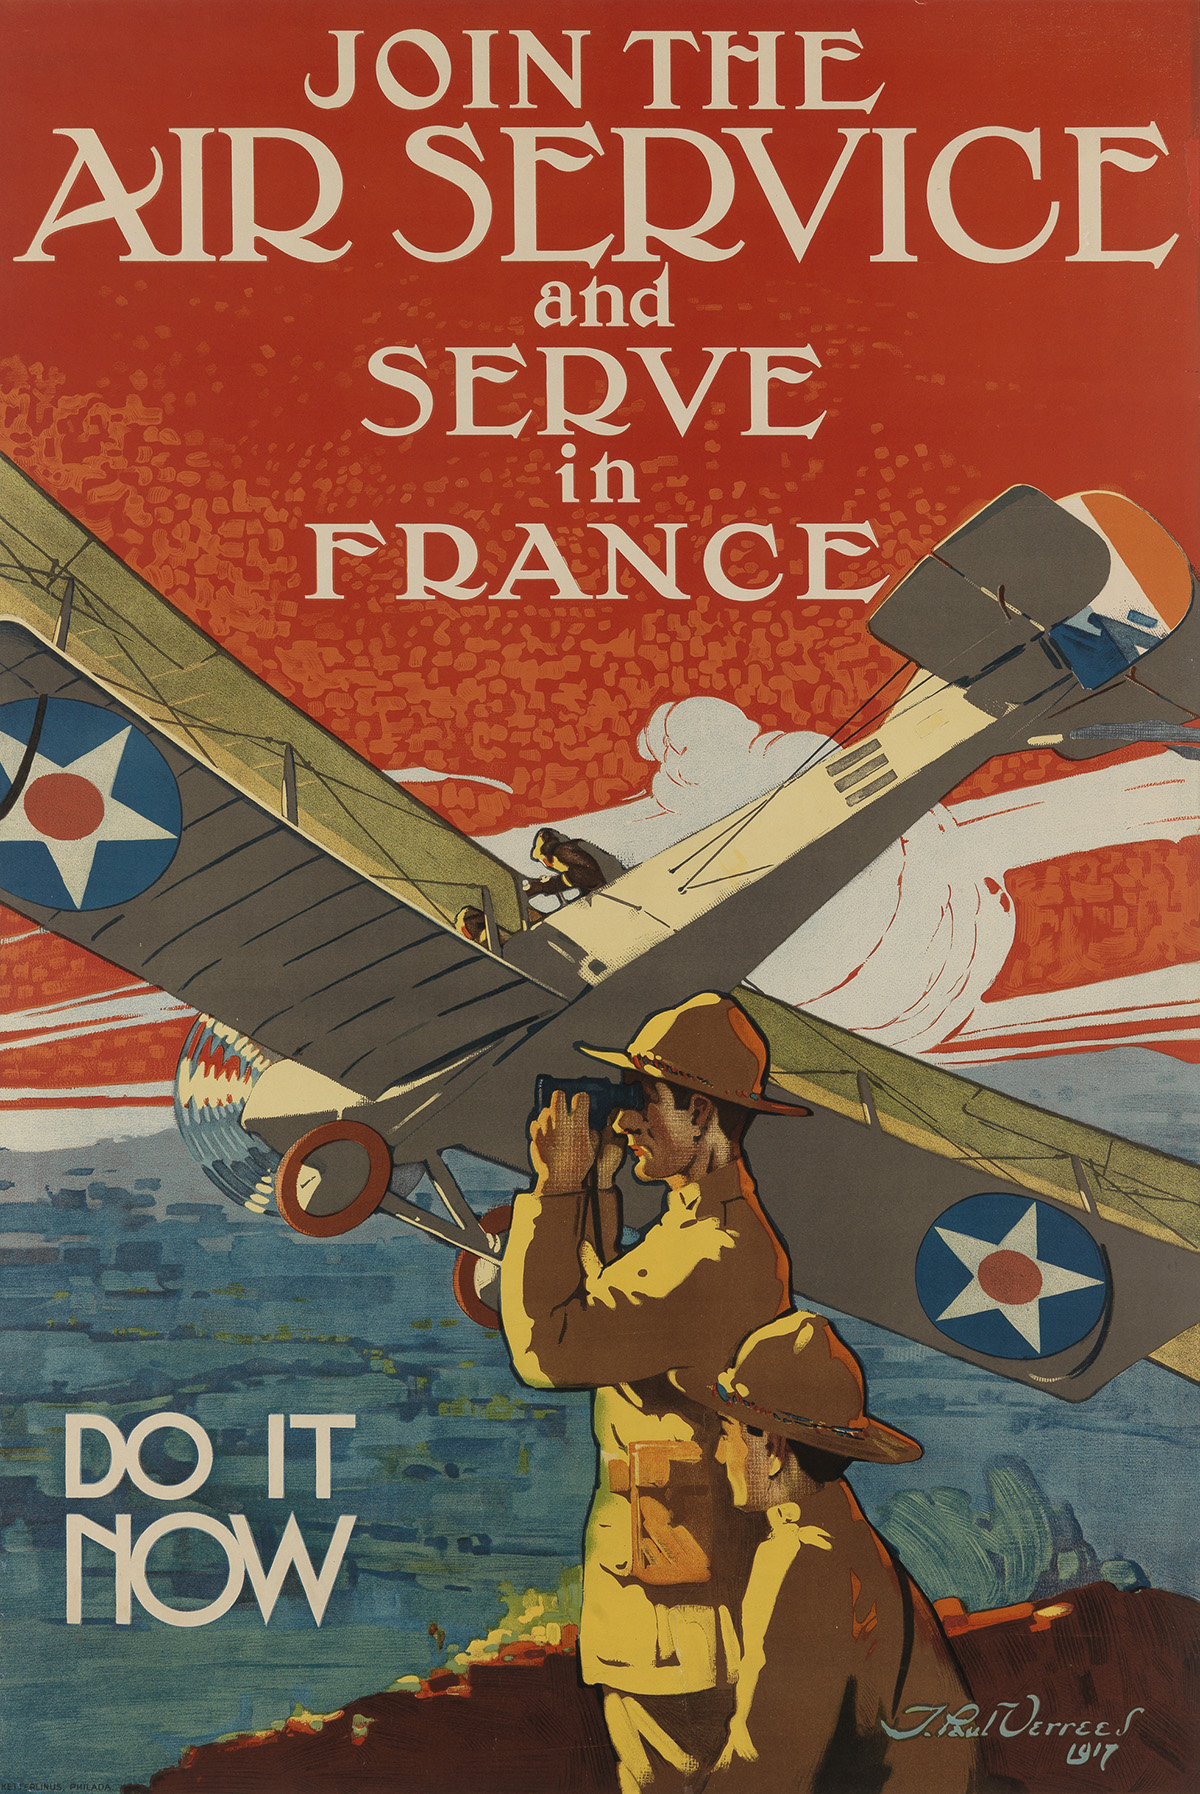 J. PAUL VERREES (1889-1942). JOIN THE AIR SERVICE AND SERVE IN FRANCE. 1917. 37x25 inches, 94x63 cm. Ketterlinus, Philadelphia.